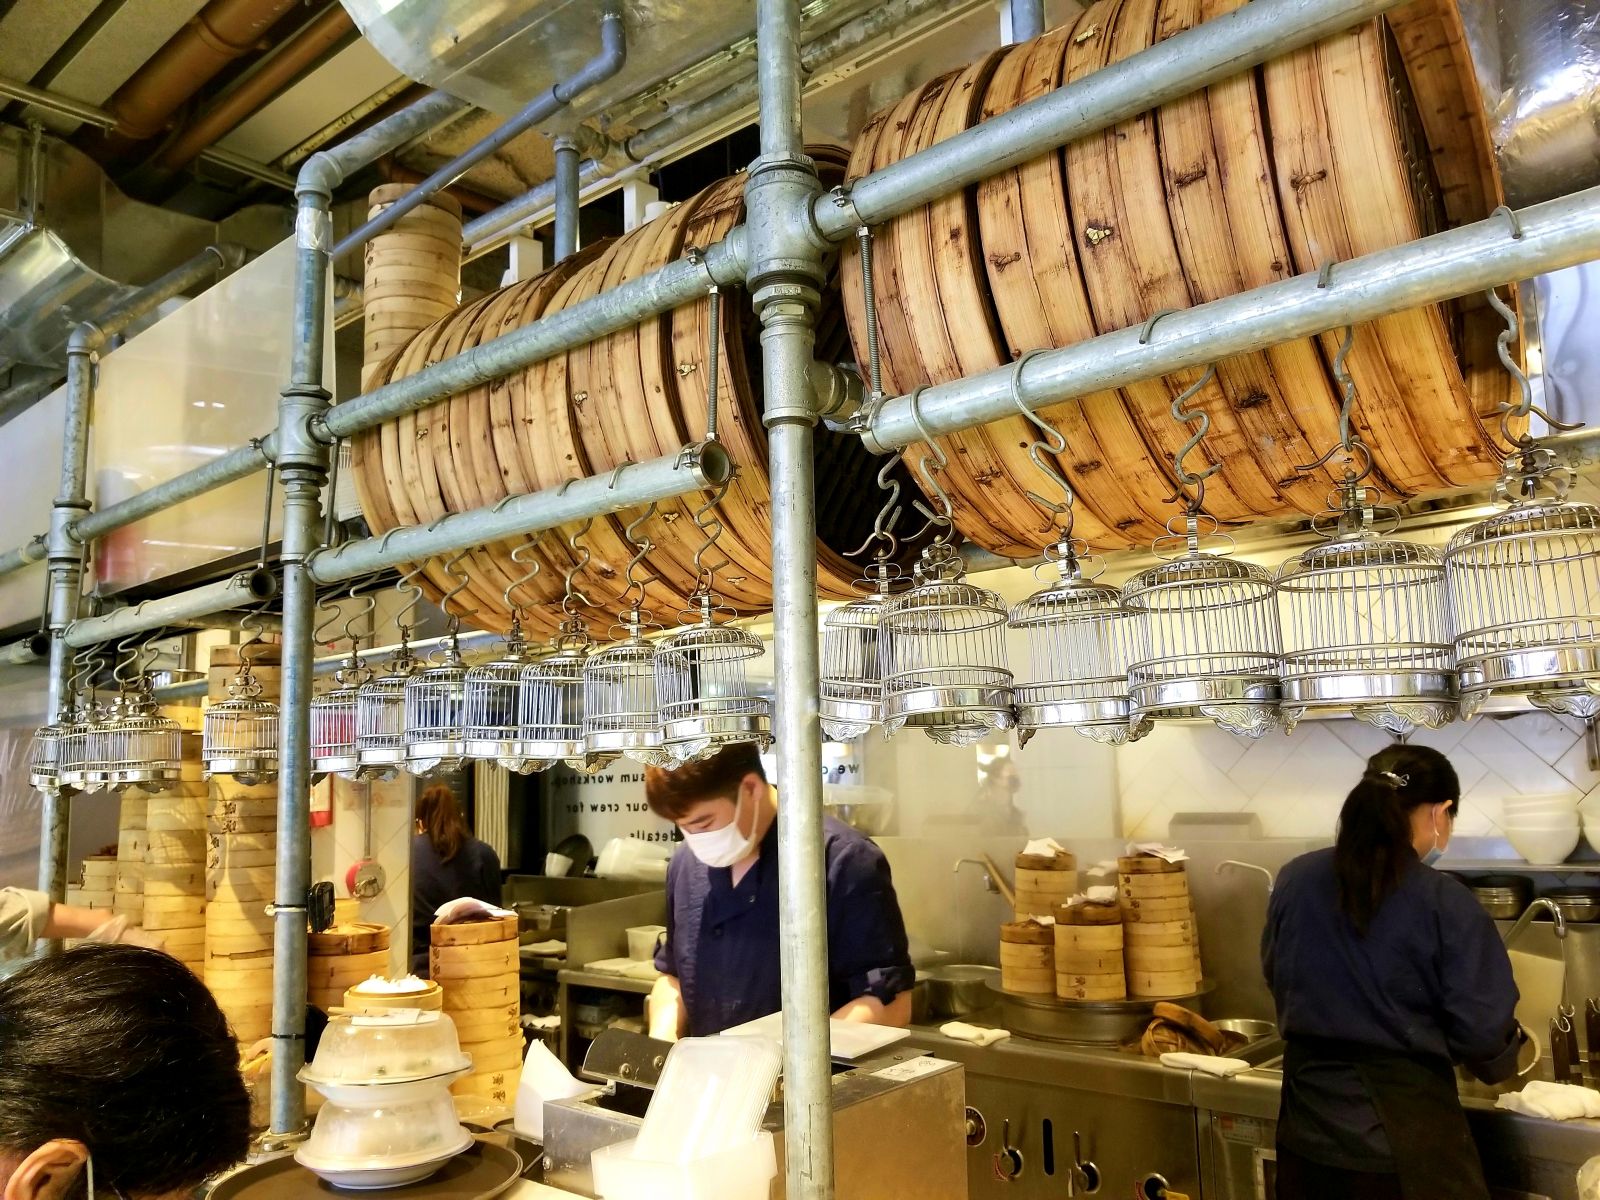 Huge bamboo baskets (蒸籠) in the kitchen